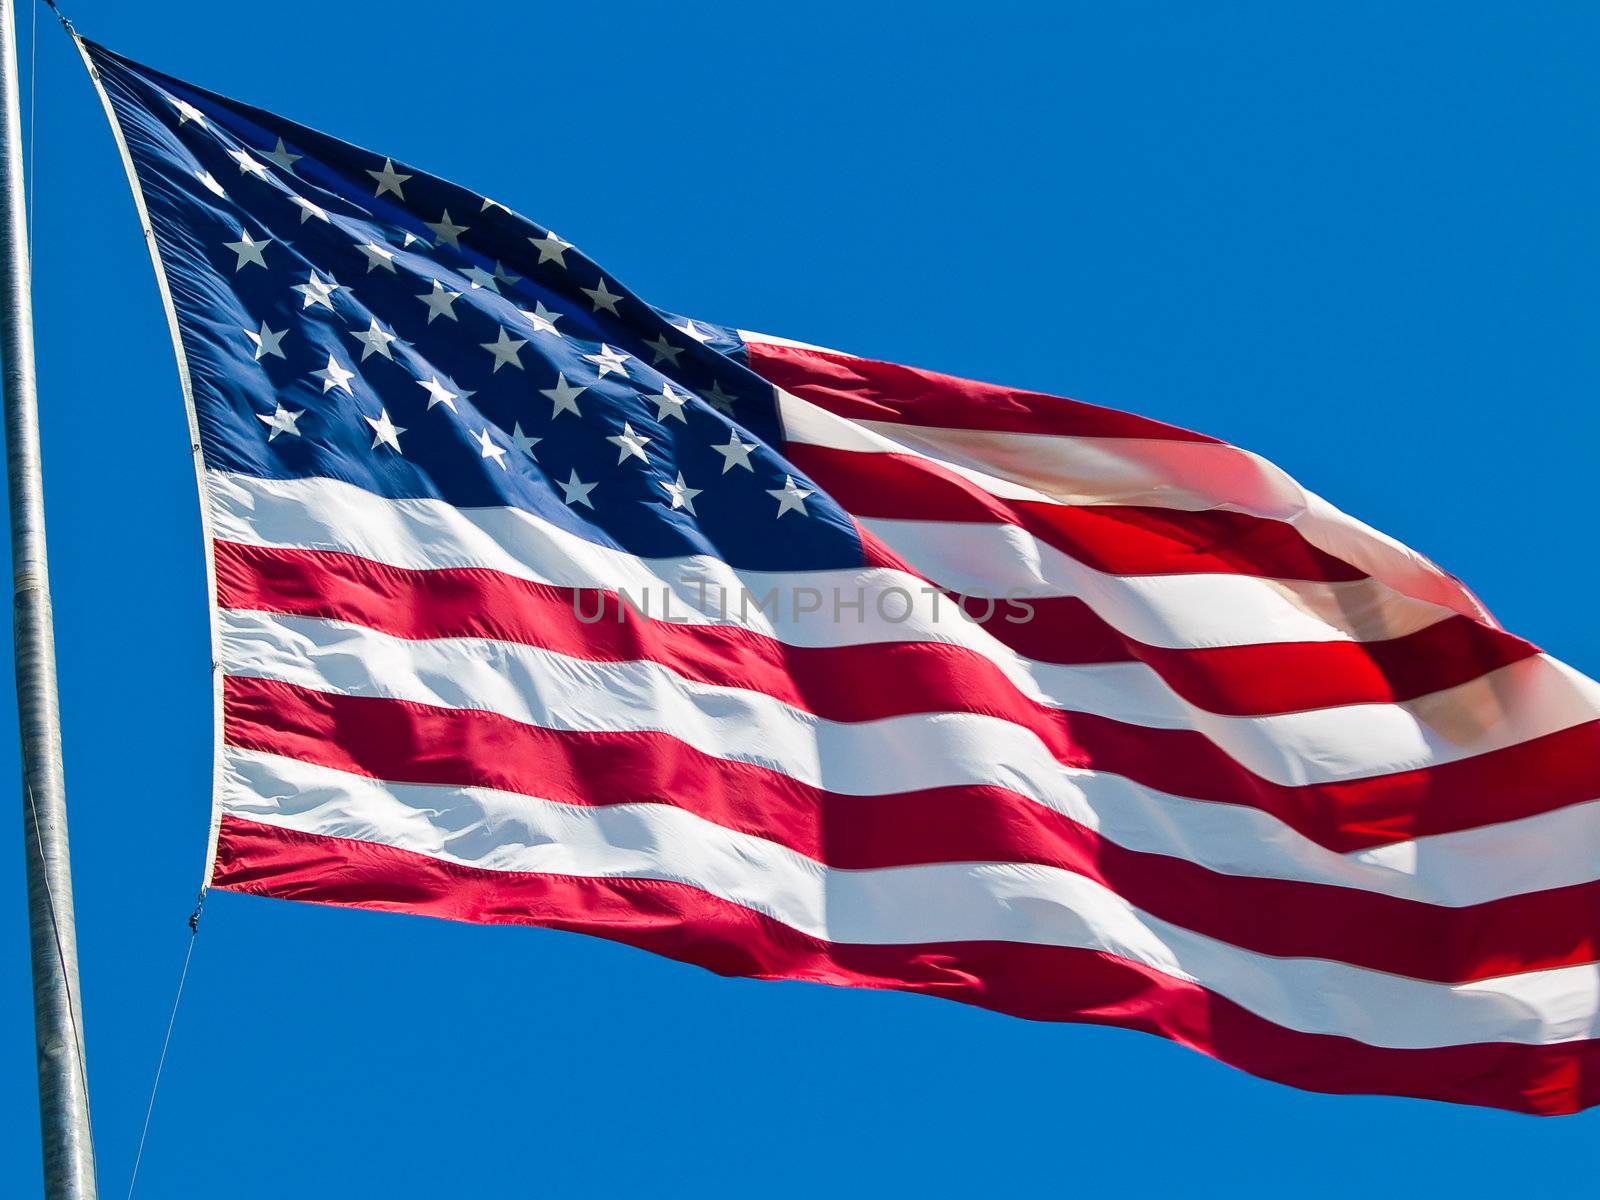 American Flag Waving Proudly on a Clear Windy Day